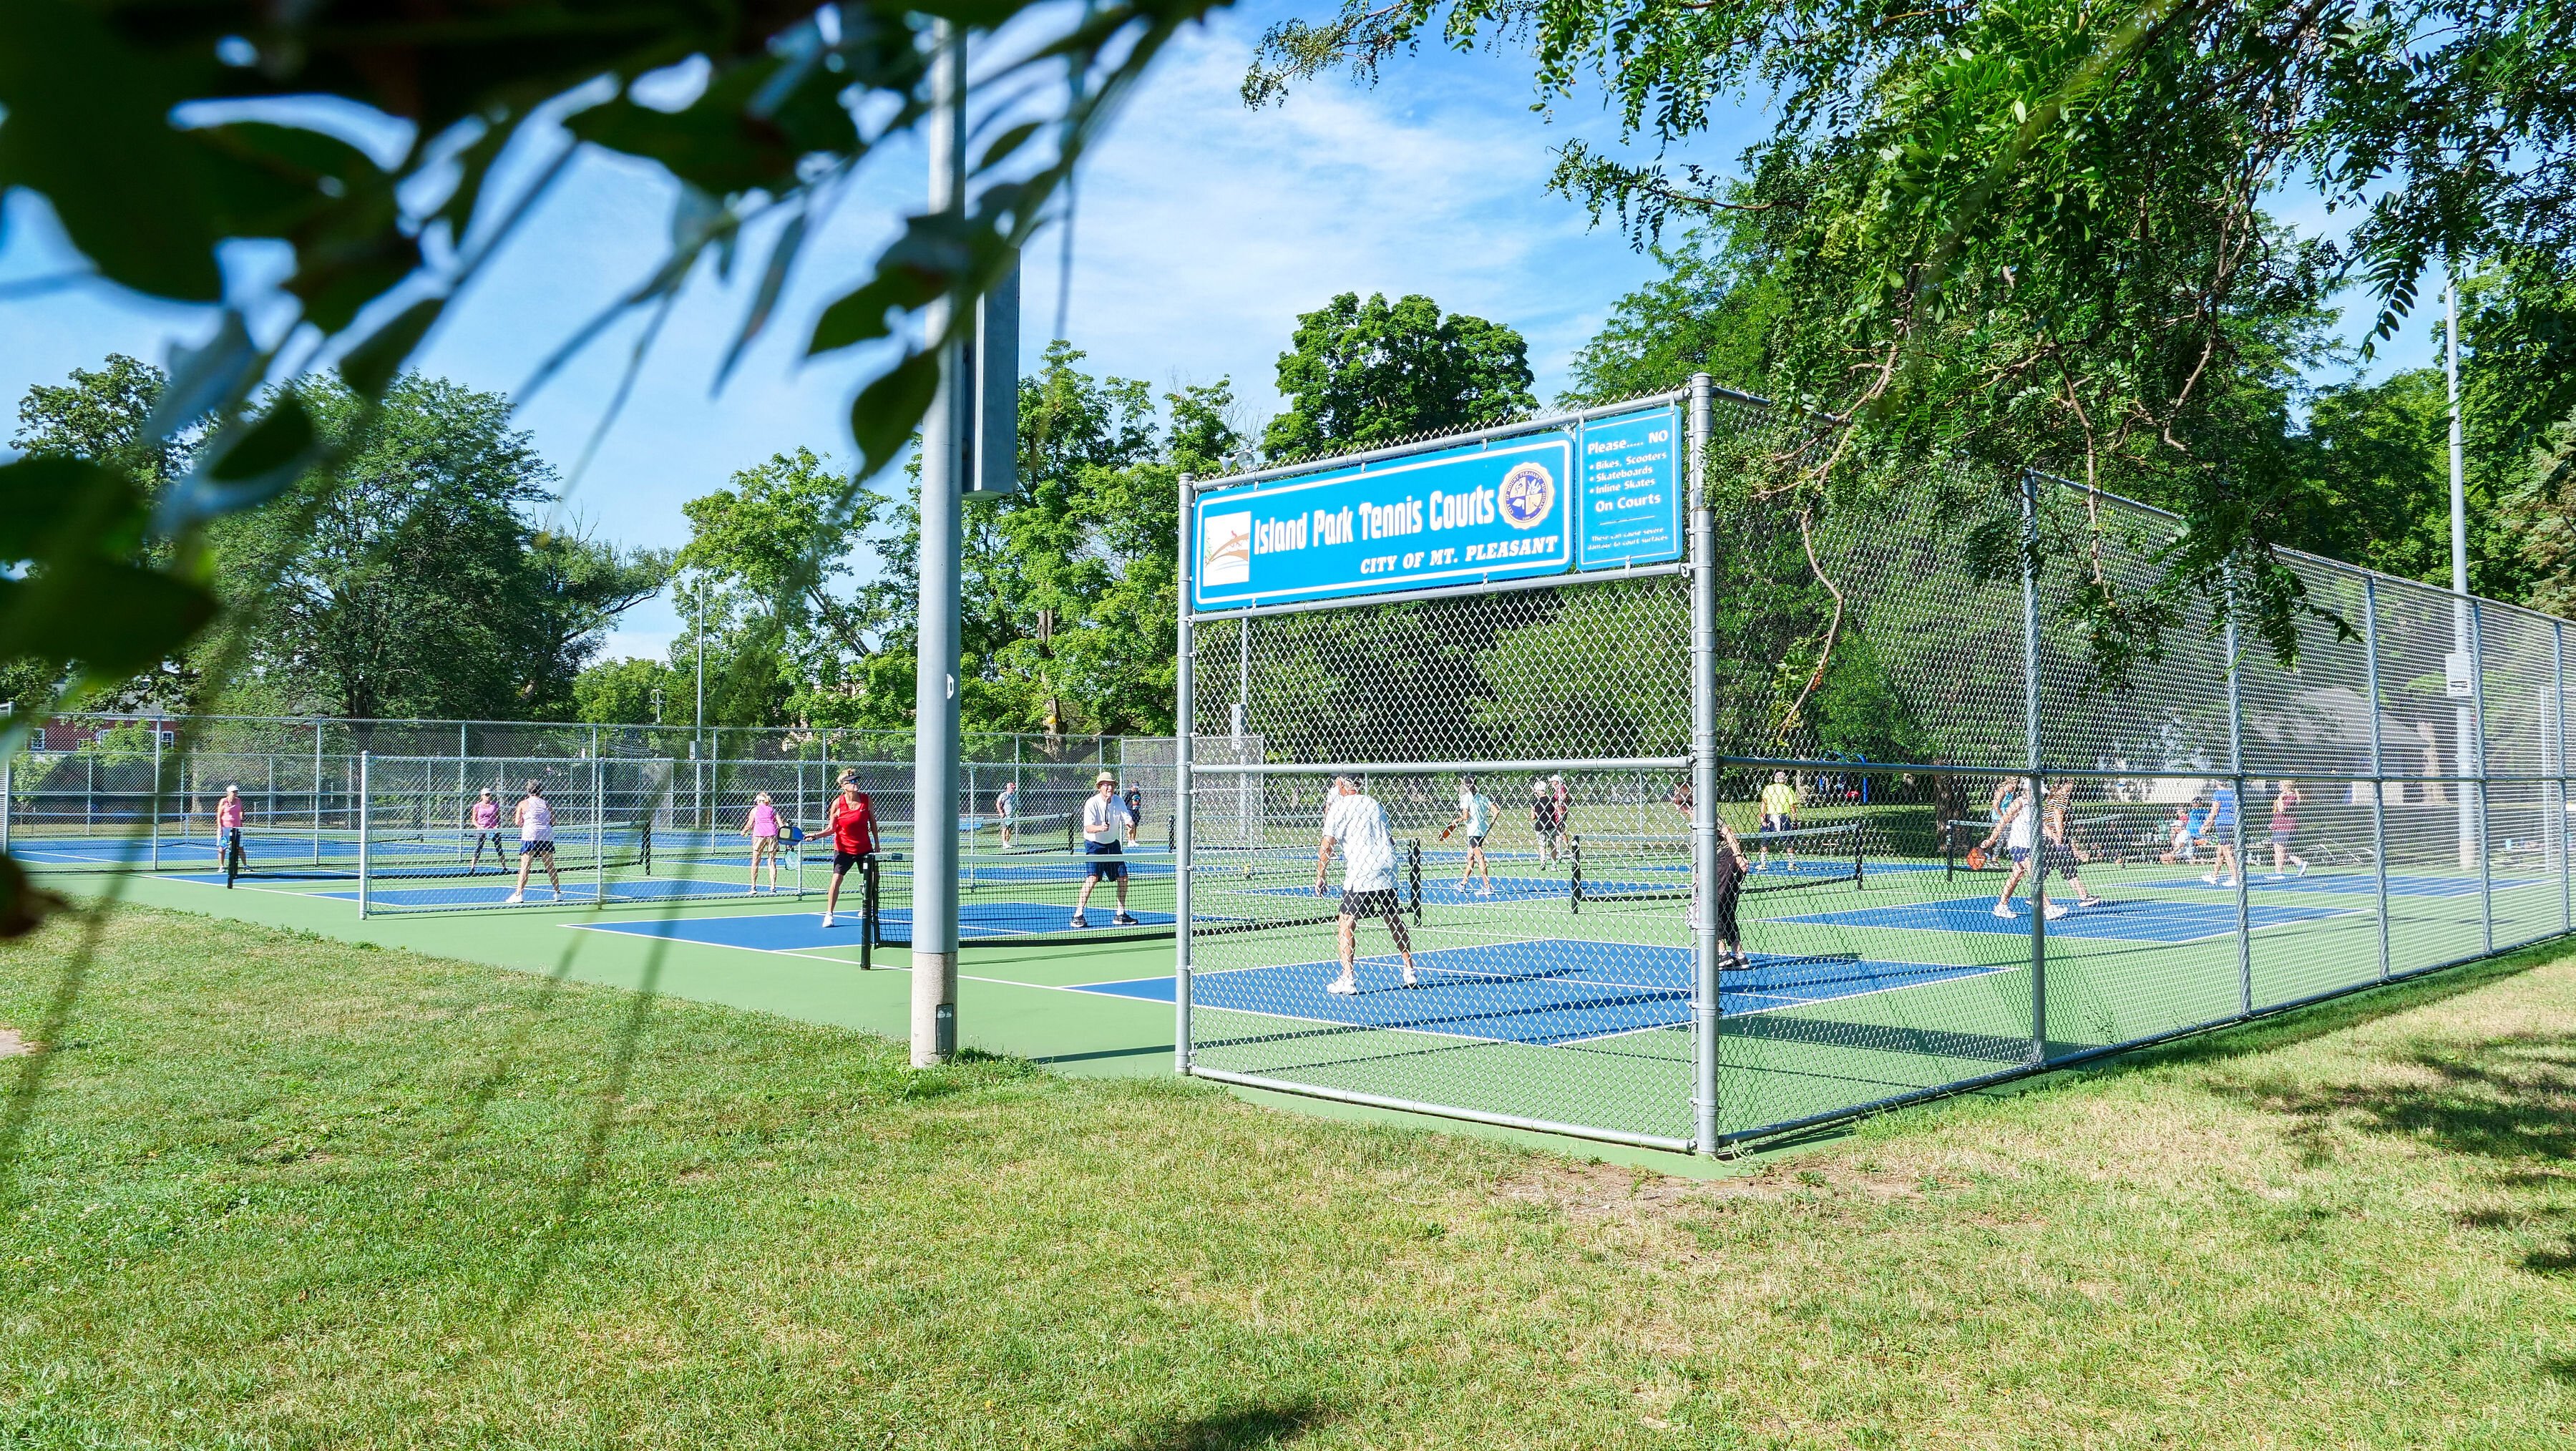 The courts at Island Park have been converted from tennis to pickleball.